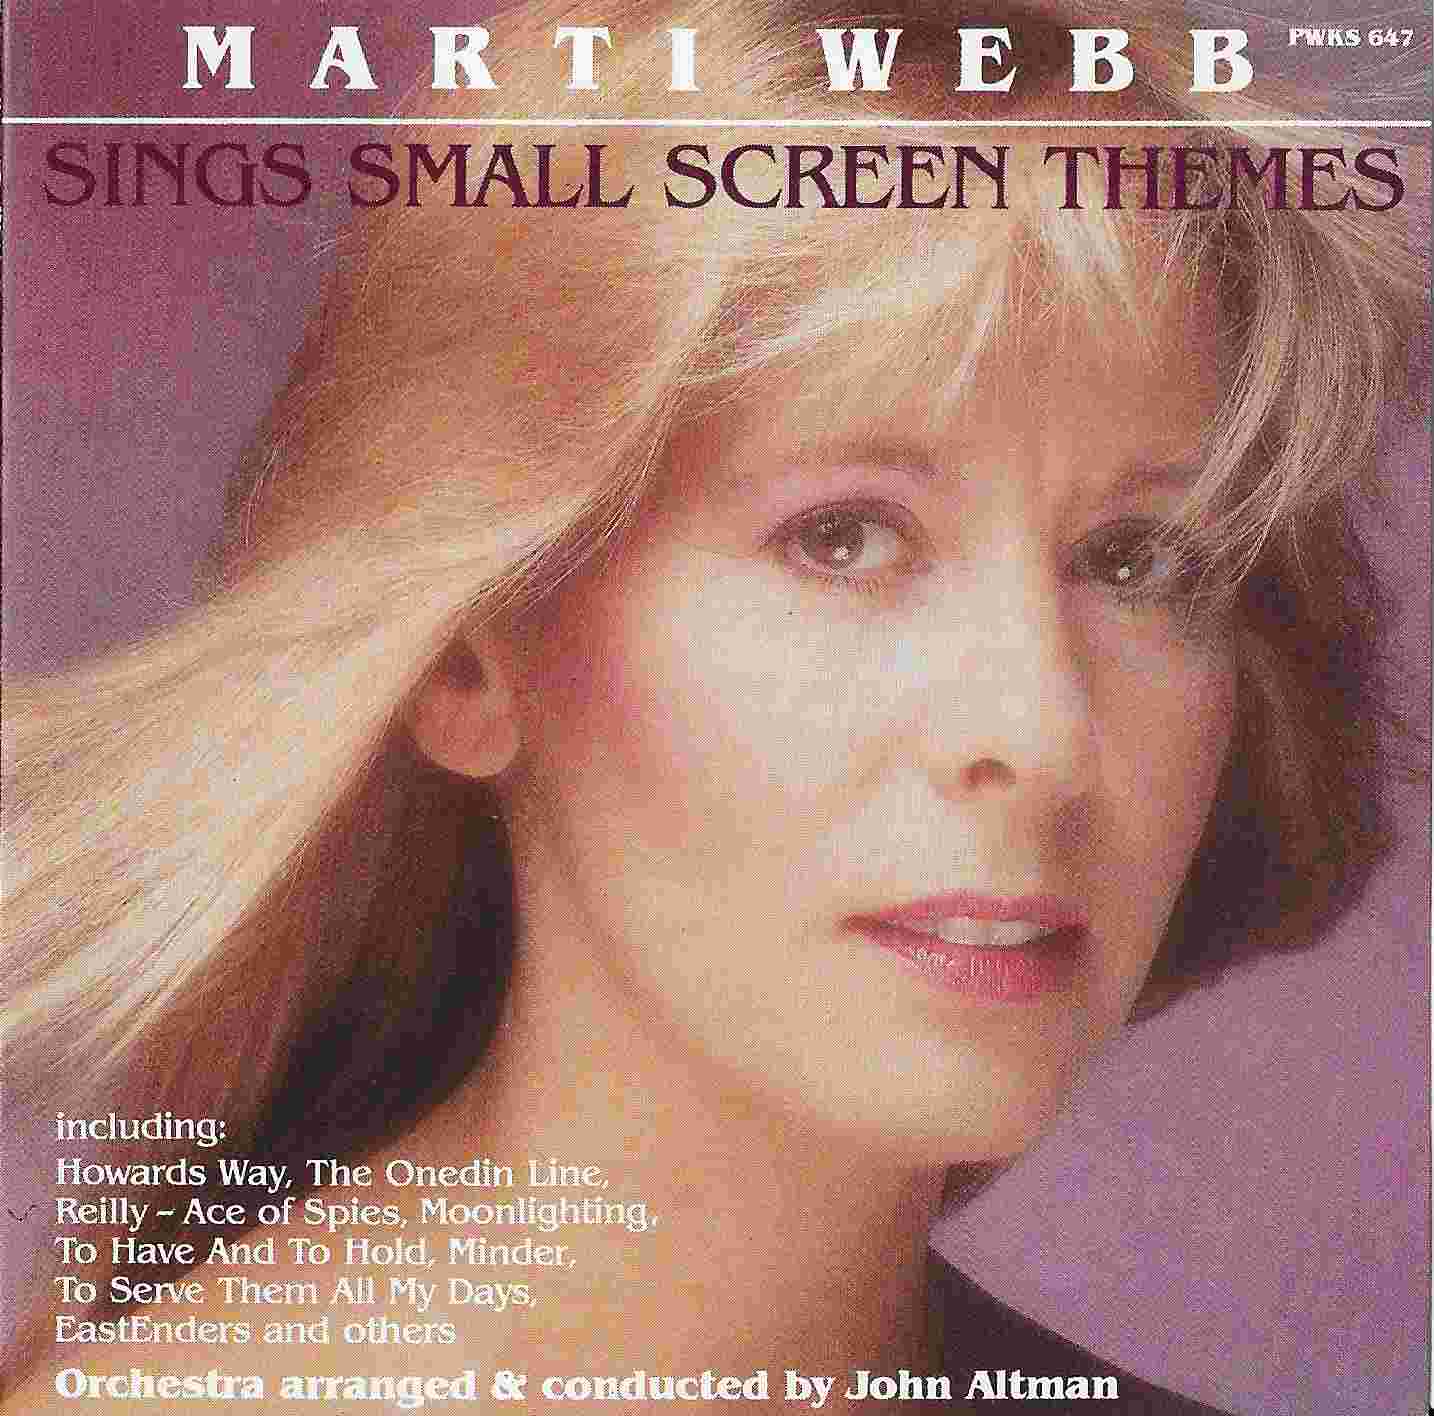 Picture of PWKS 647 Always there - Marti Webb by artist Marti Webb from the BBC cds - Records and Tapes library